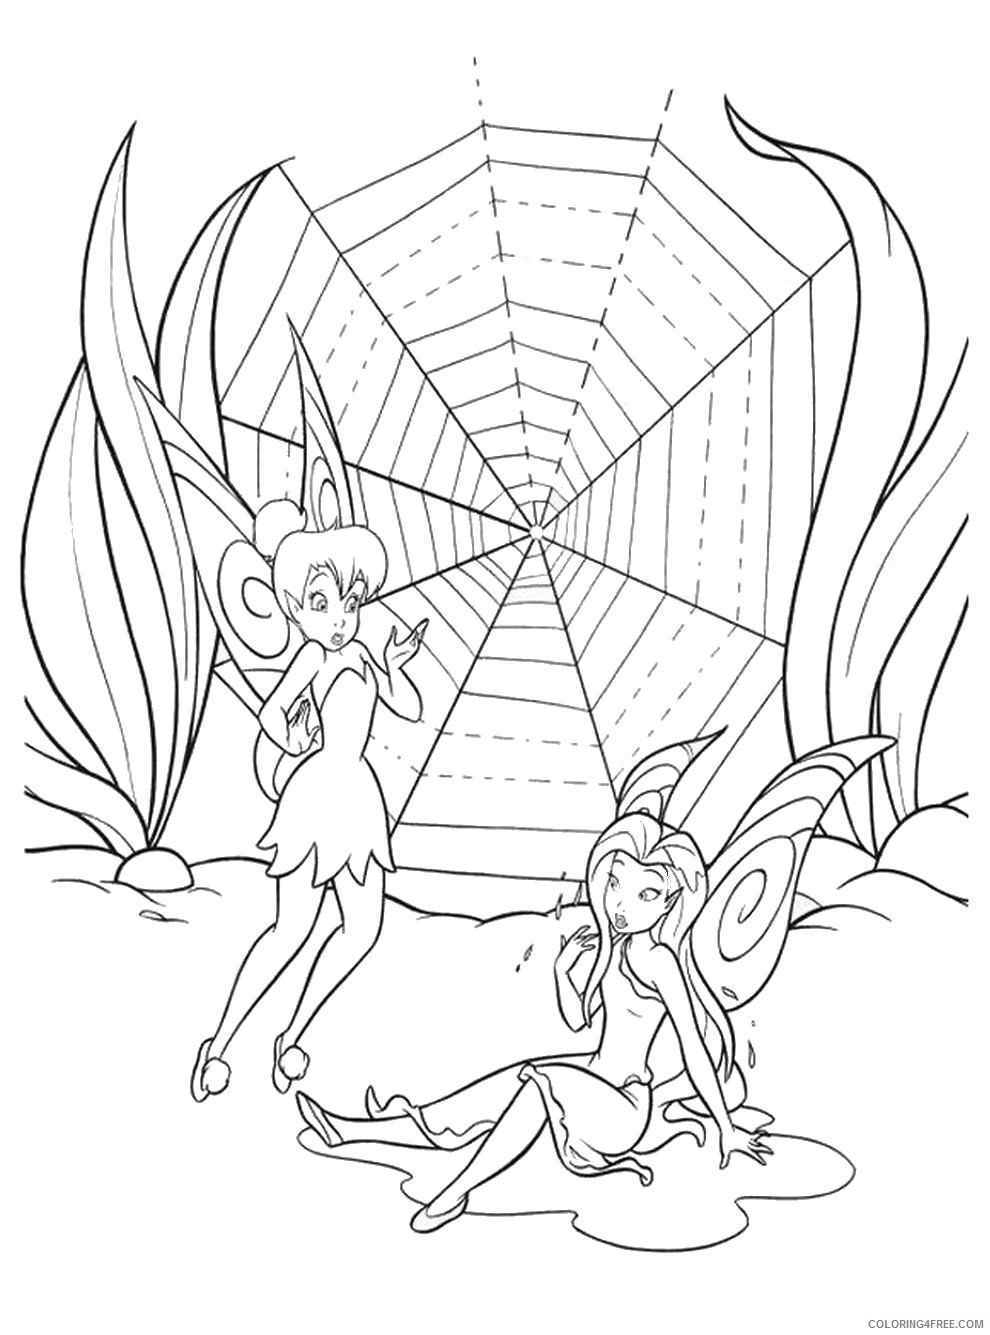 Tinker Bell Coloring Pages Cartoons tinkerbell_cl_18 Printable 2020 6625 Coloring4free